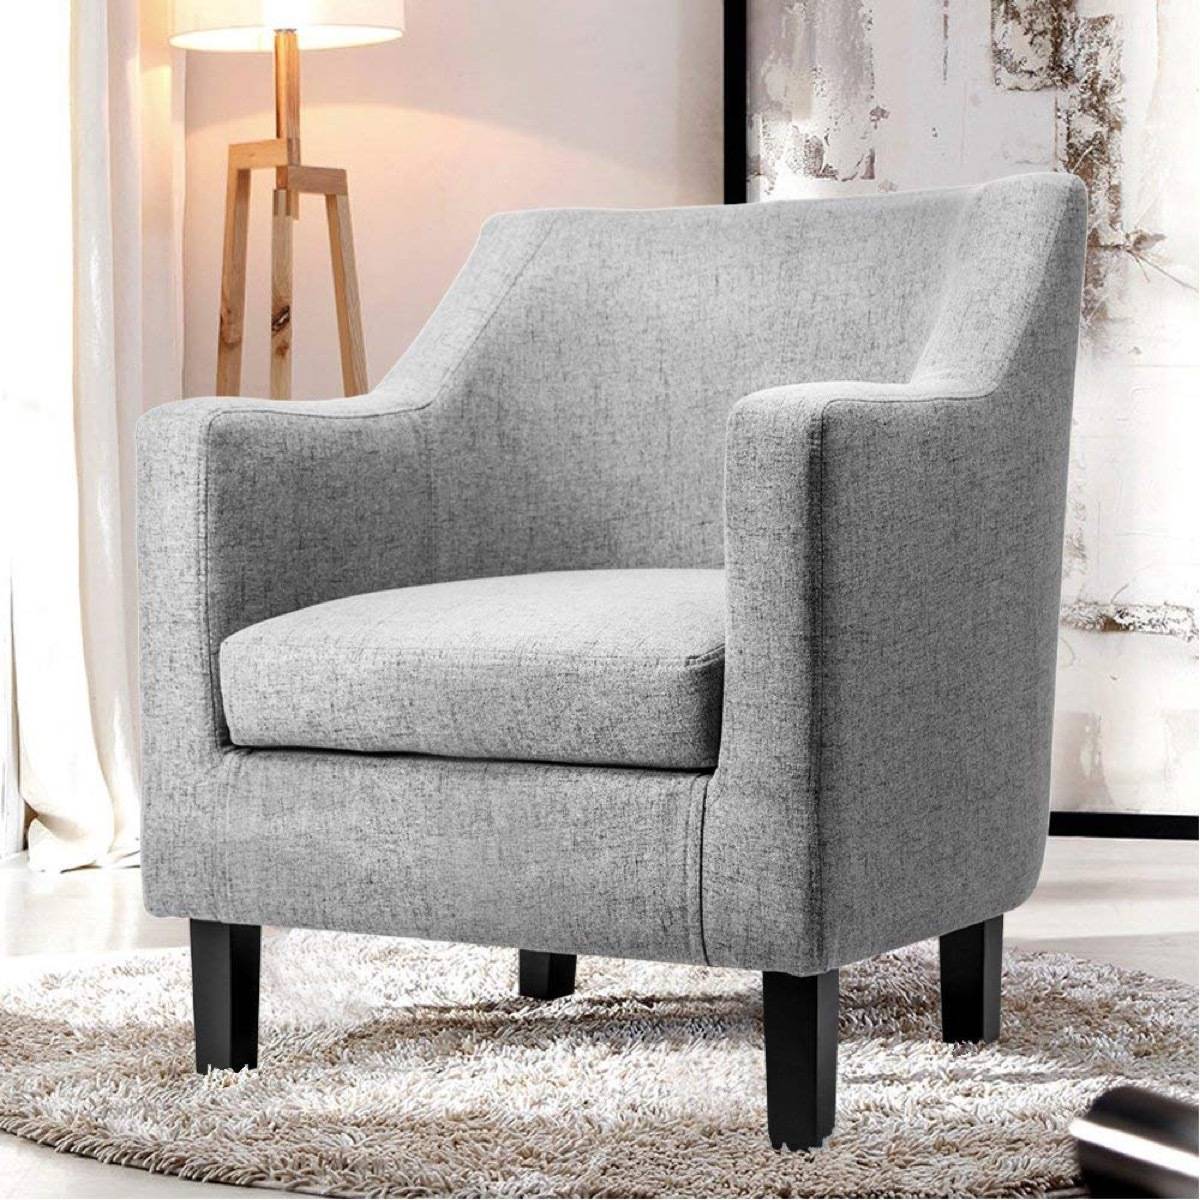 Fabric accent chair from Amazon